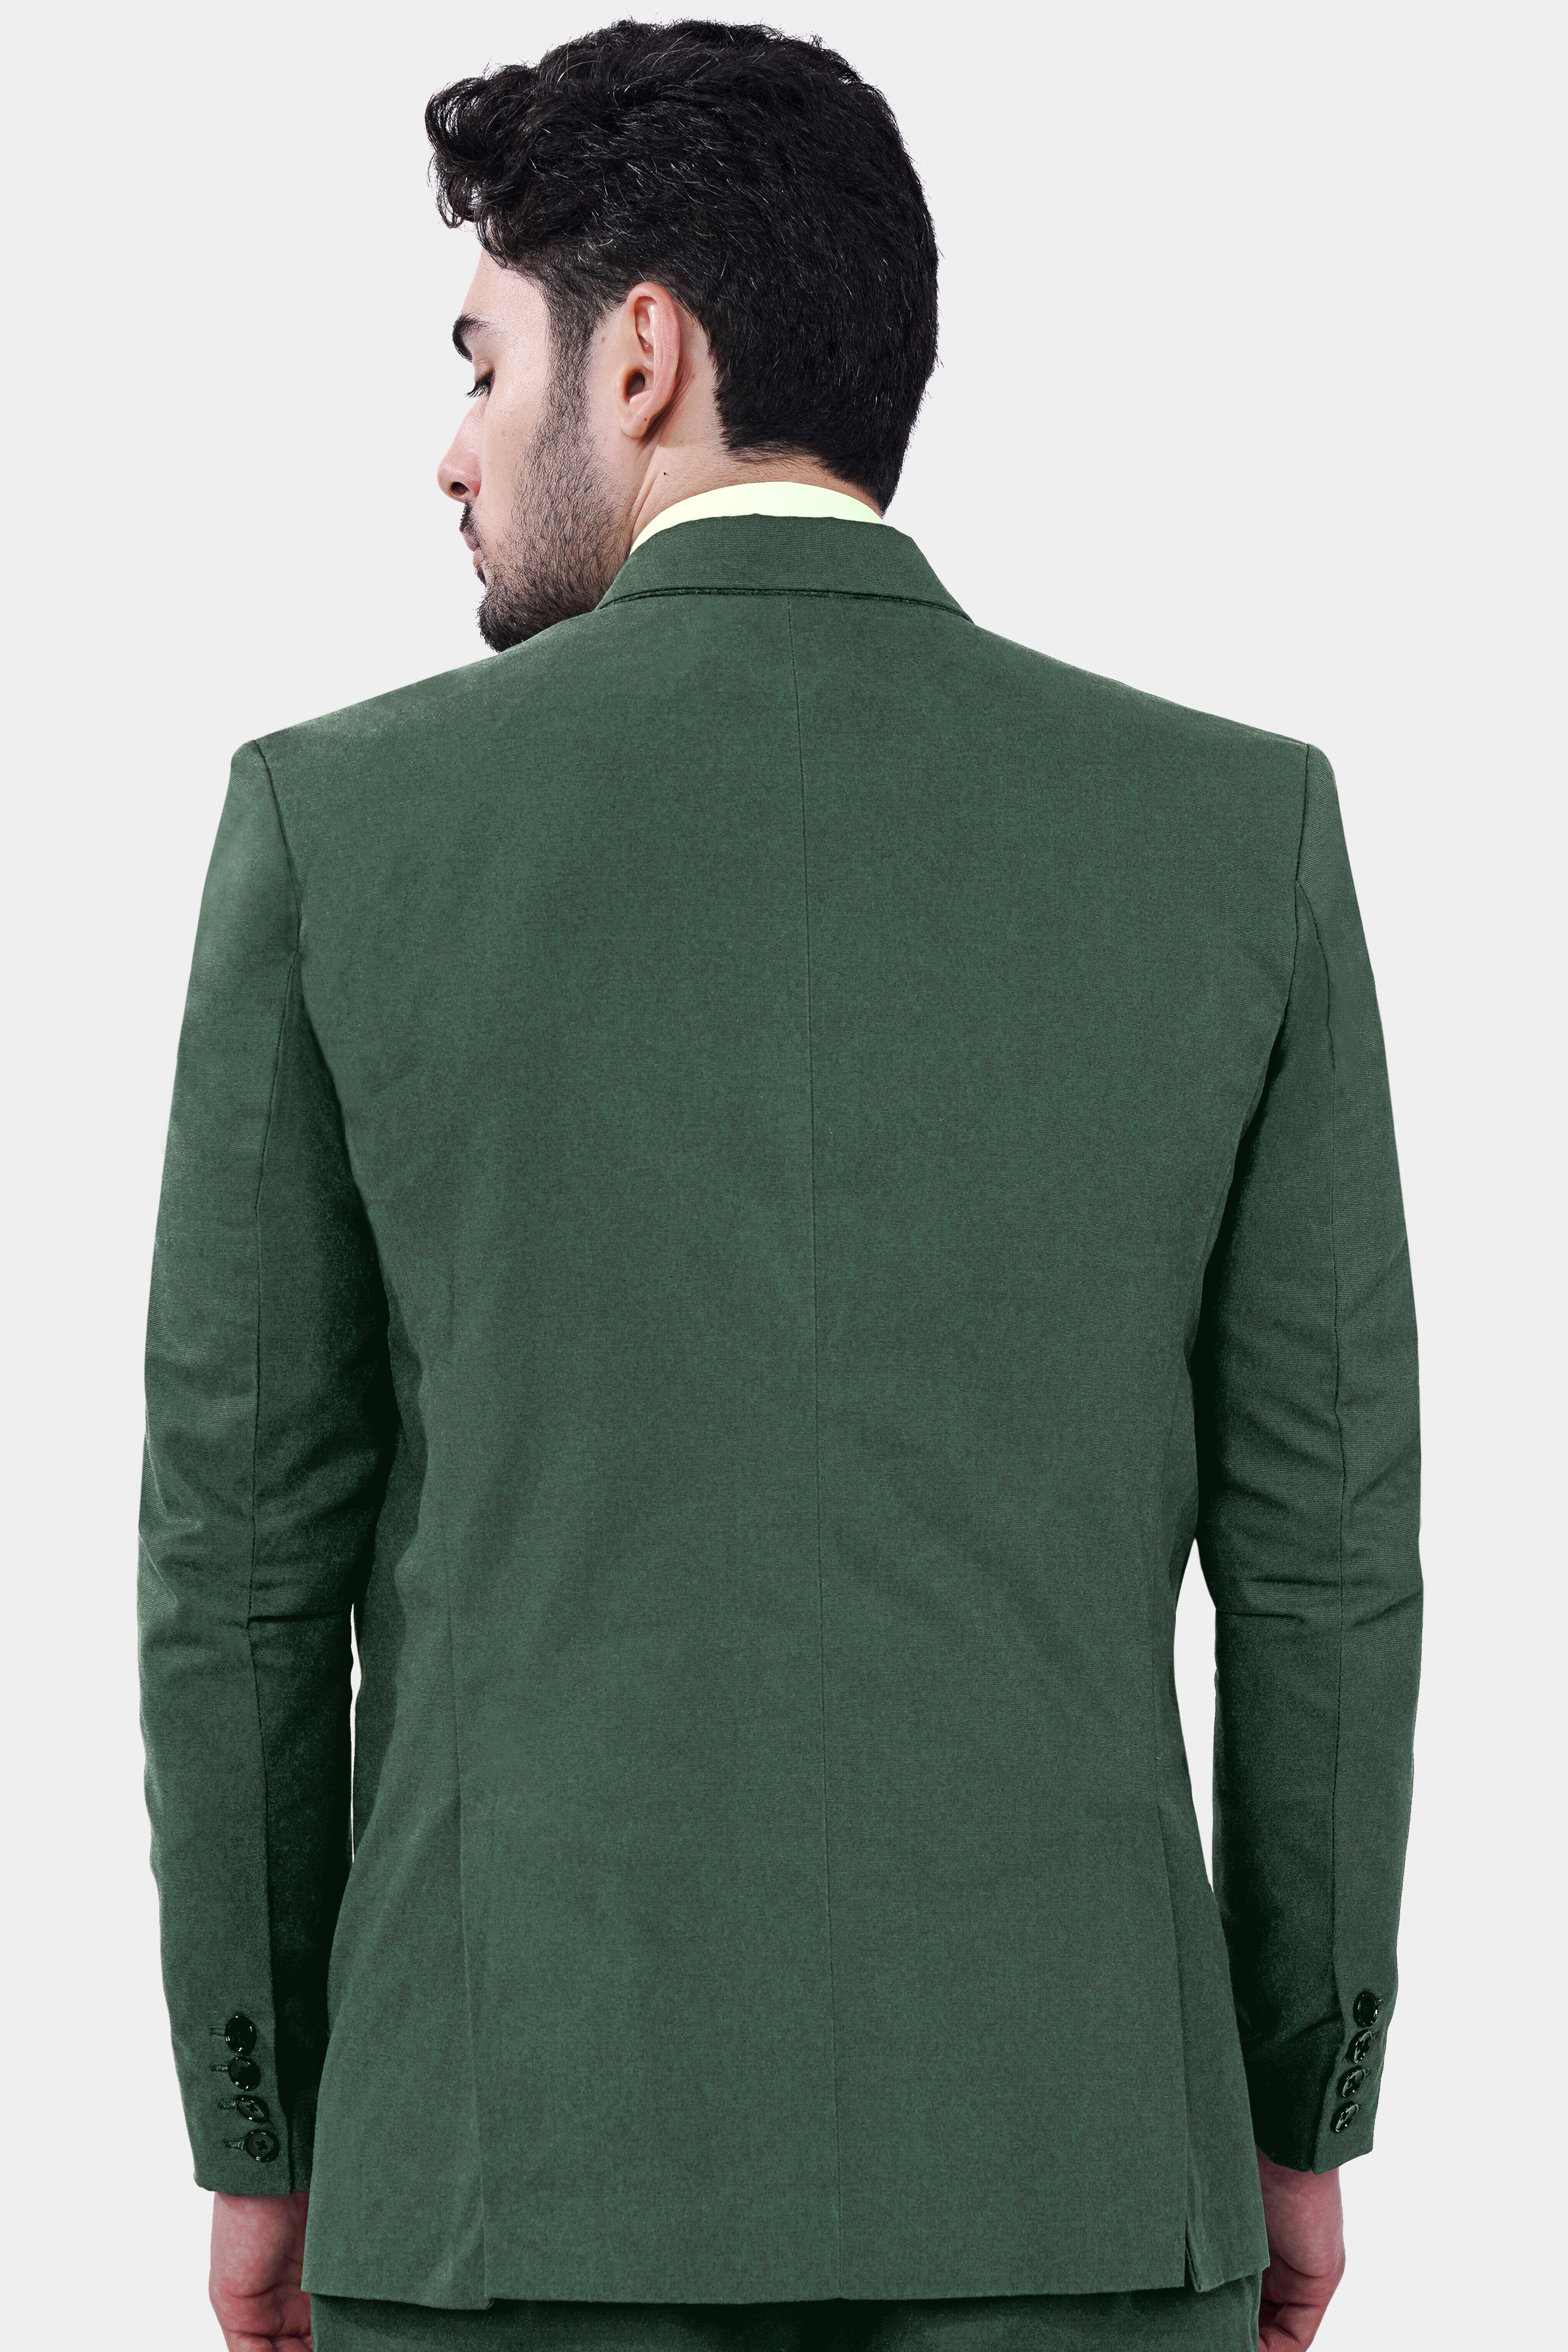 Fern Green Premium Cotton Double Breasted Blazer BL2970-DB-PP-36, BL2970-DB-PP-38, BL2970-DB-PP-40, BL2970-DB-PP-42, BL2970-DB-PP-44, BL2970-DB-PP-46, BL2970-DB-PP-48, BL2970-DB-PP-50, BL2970-DB-PP-52, BL2970-DB-PP-54, BL2970-DB-PP-56, BL2970-DB-PP-58, BL2970-DB-PP-60